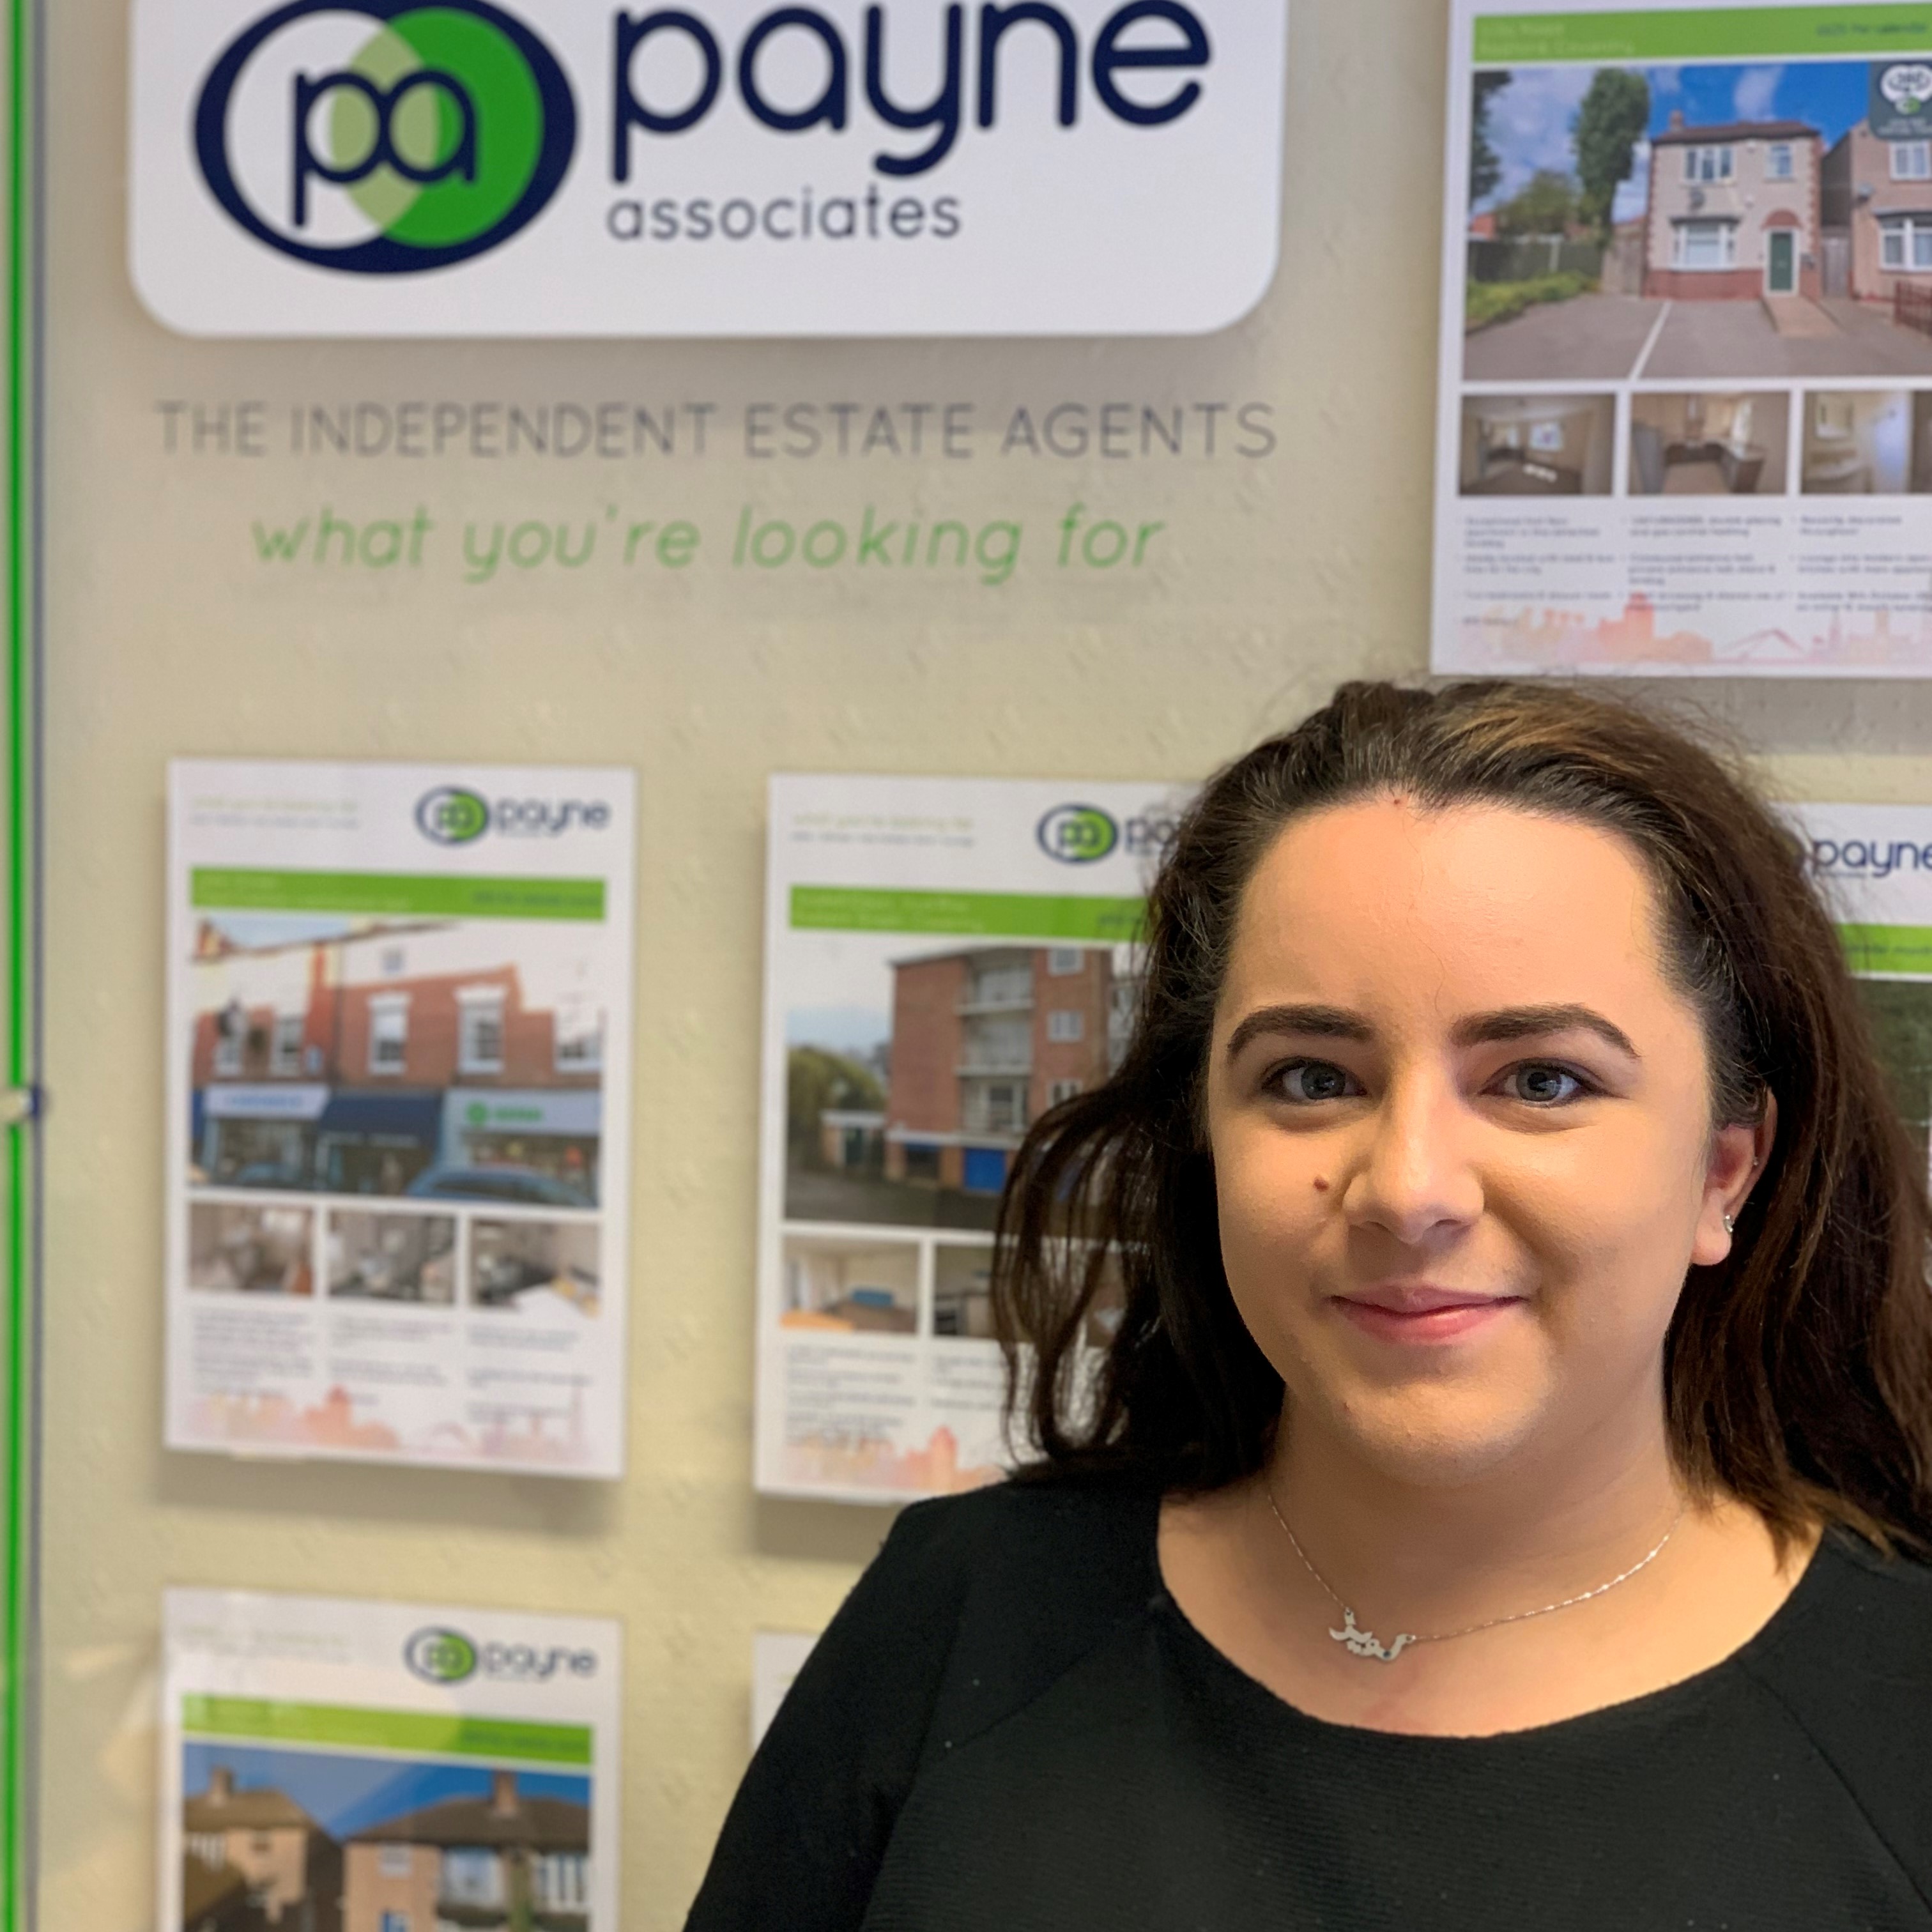 Louise Morgan, Property Manager